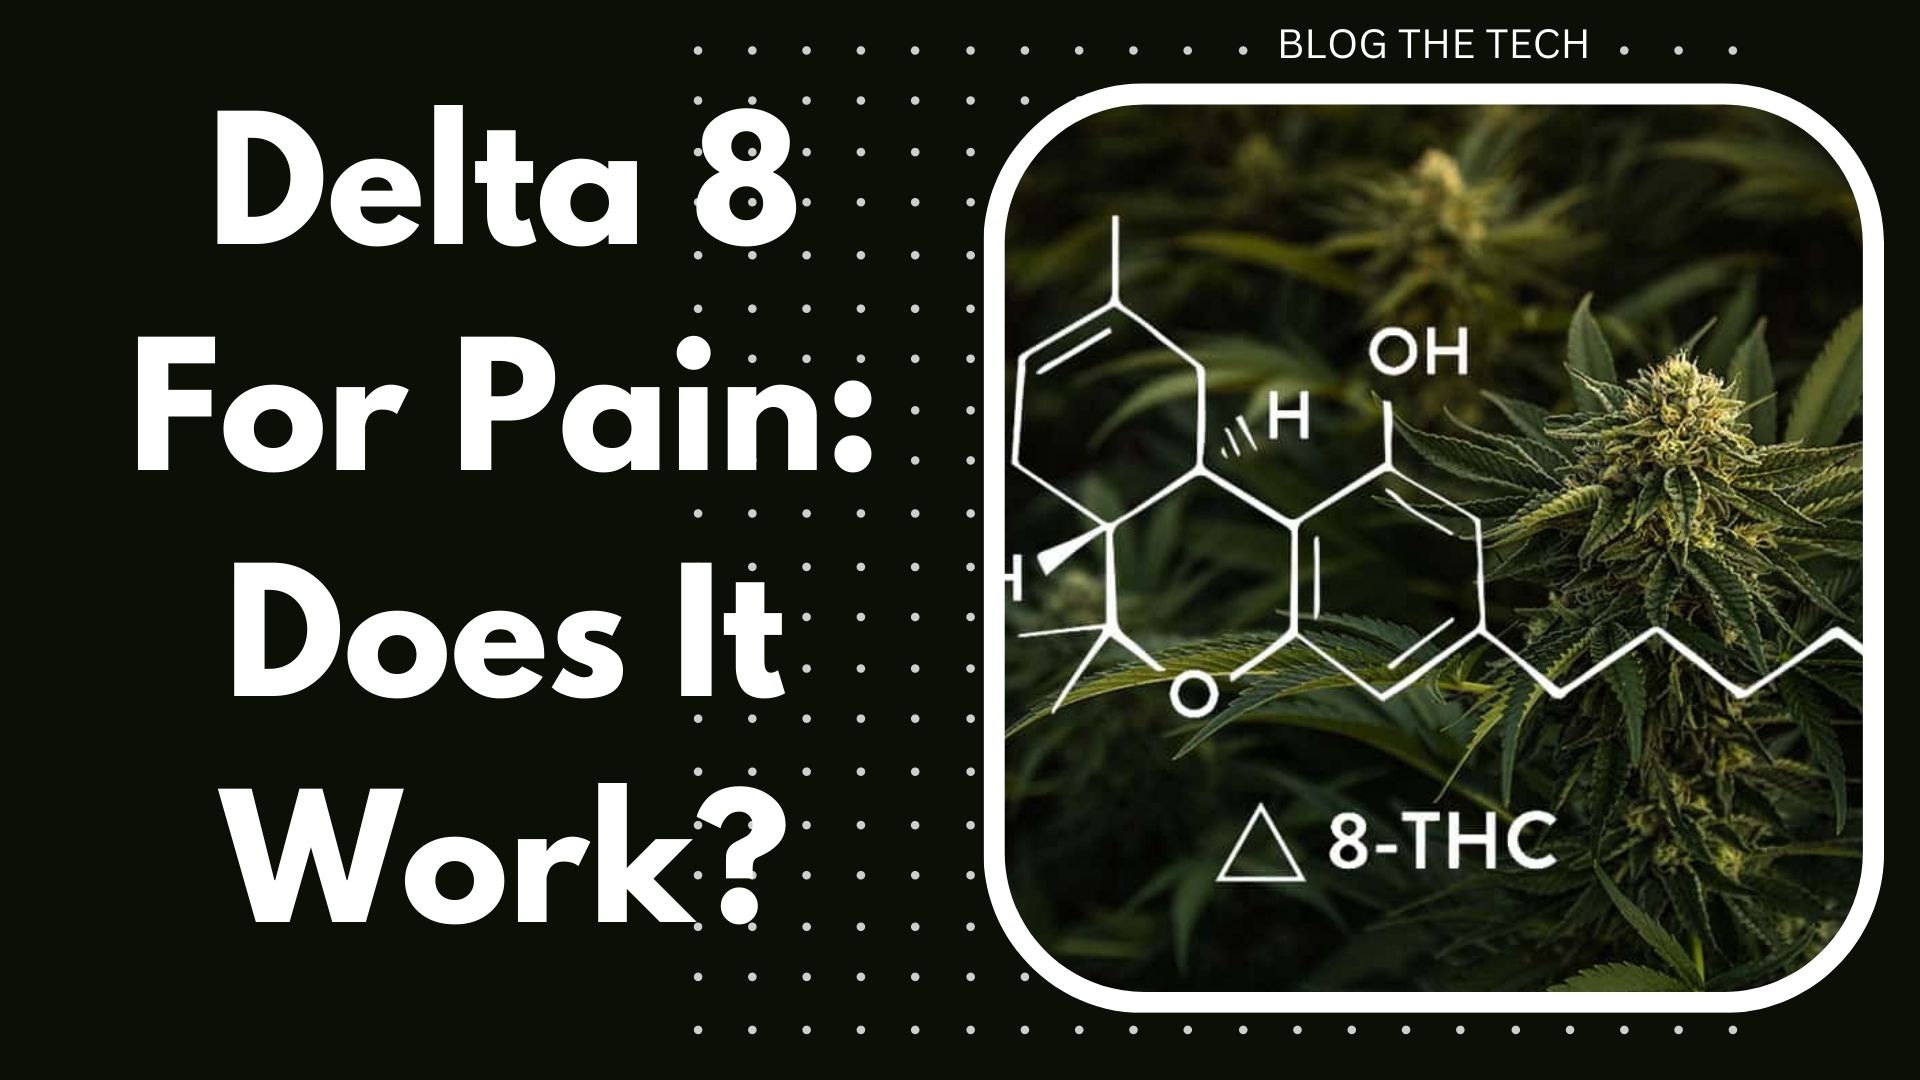 Delta 8 For Pain: Does It Work?